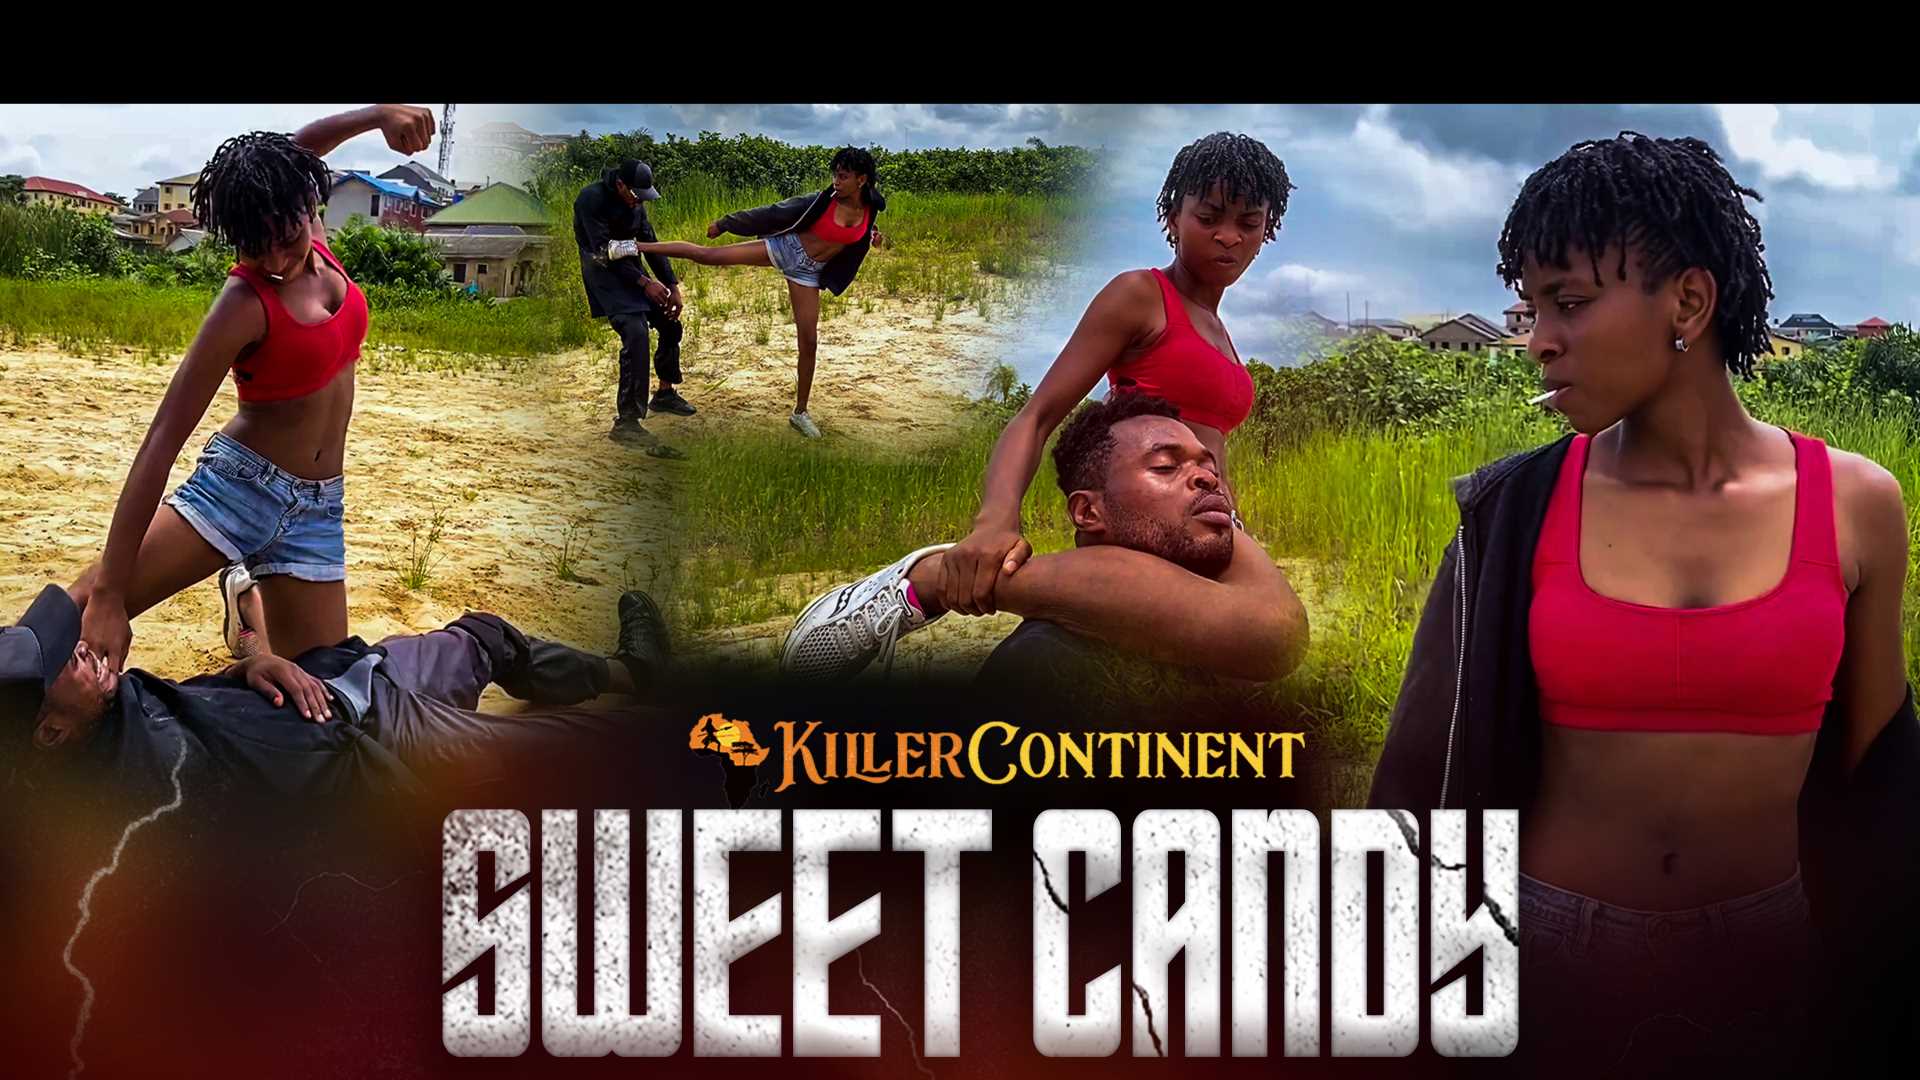 #5 - Sweet Candy